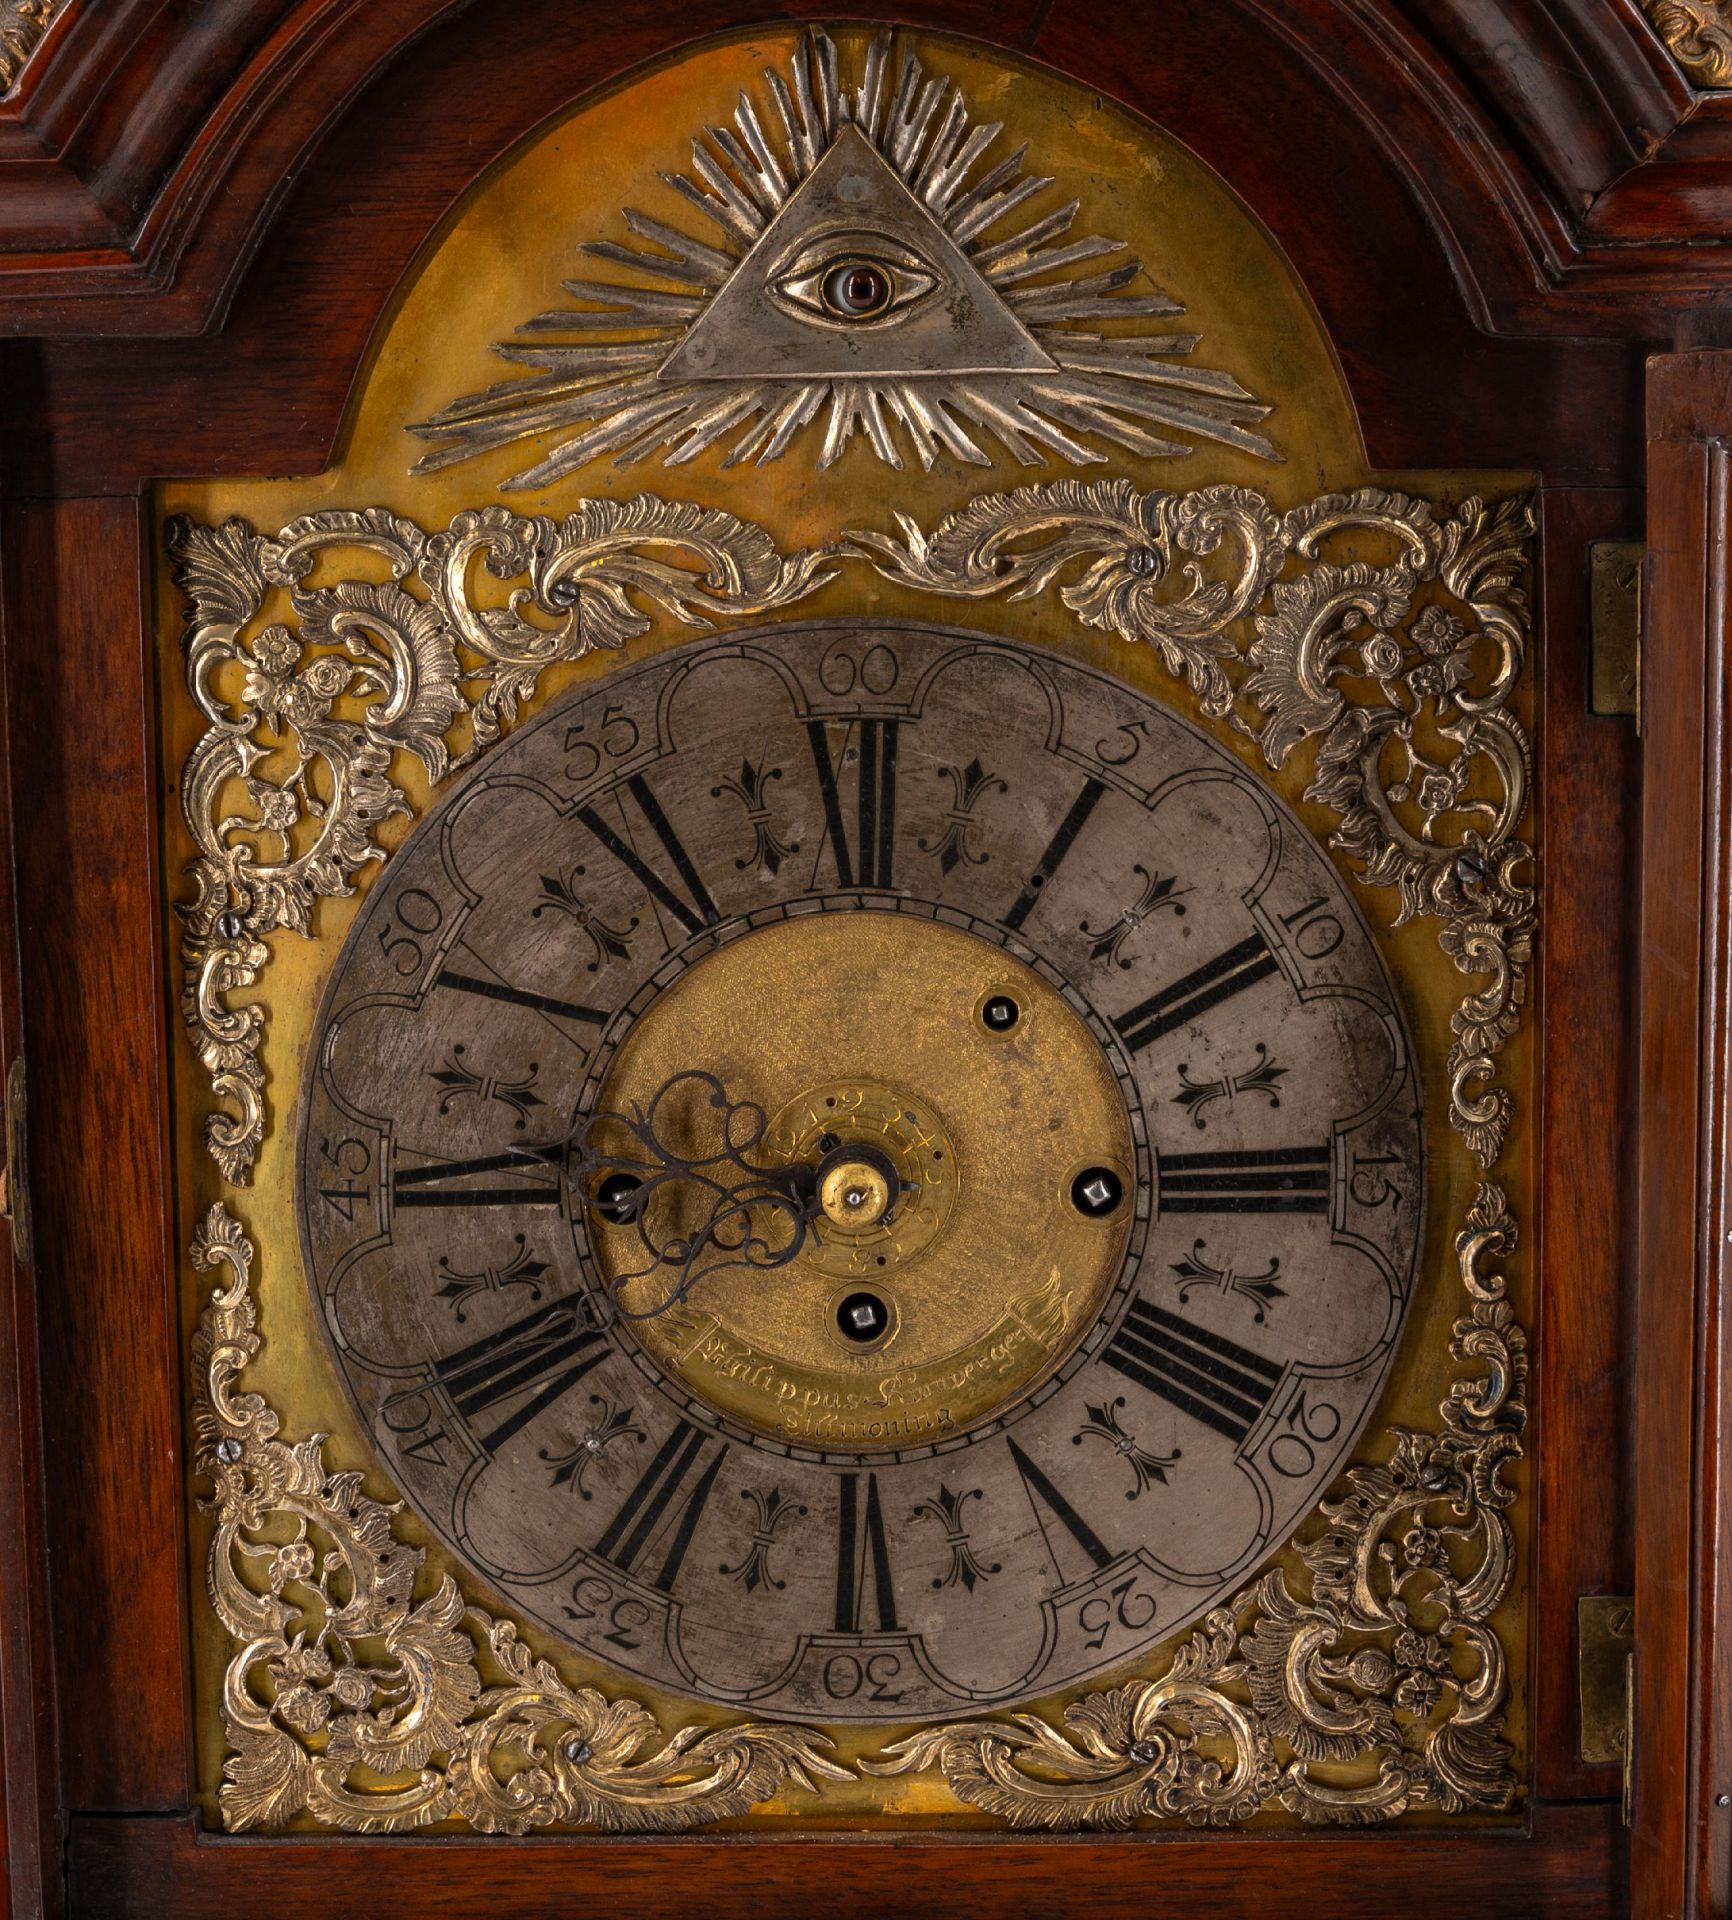 Philipp Kumperger: BRACKET CLOCK WITH MOVING EYE OF GOD MADE OF MAHOGANY, BRONZE, BRASS AND GLASS - Image 5 of 6